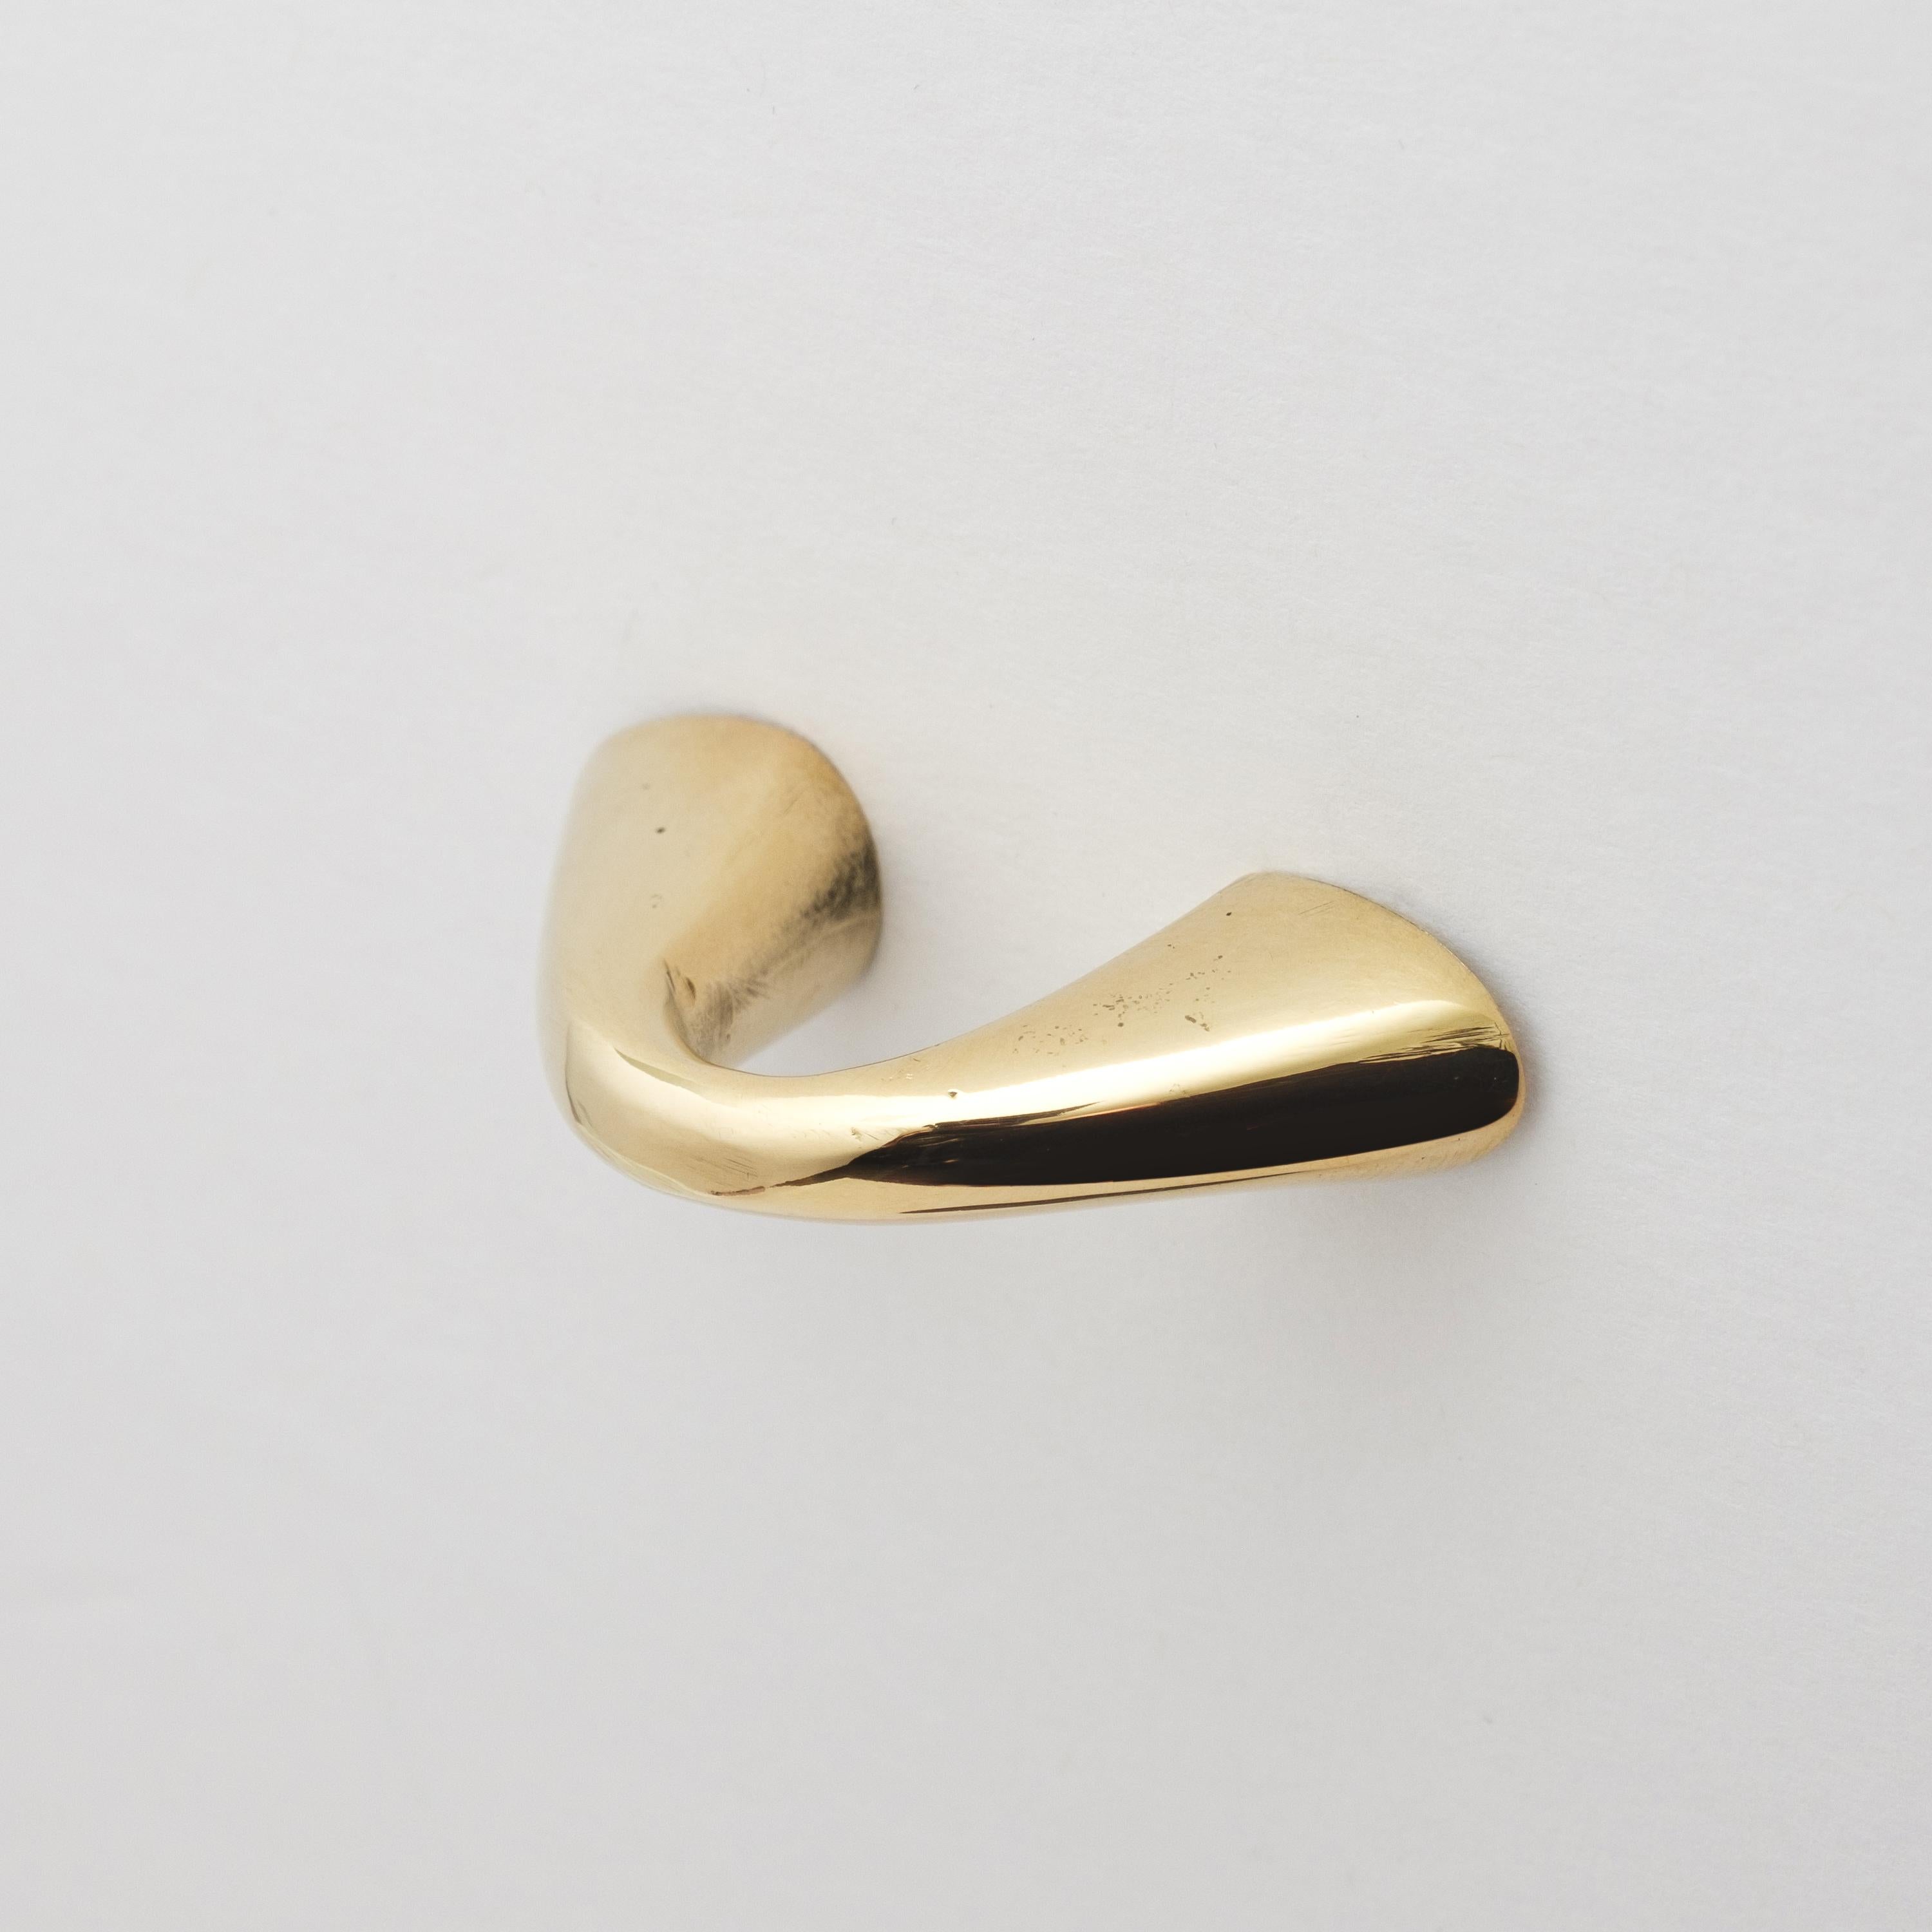 Contemporary Carl Auböck Model #9031-1 Polished Brass Drawer Pull For Sale